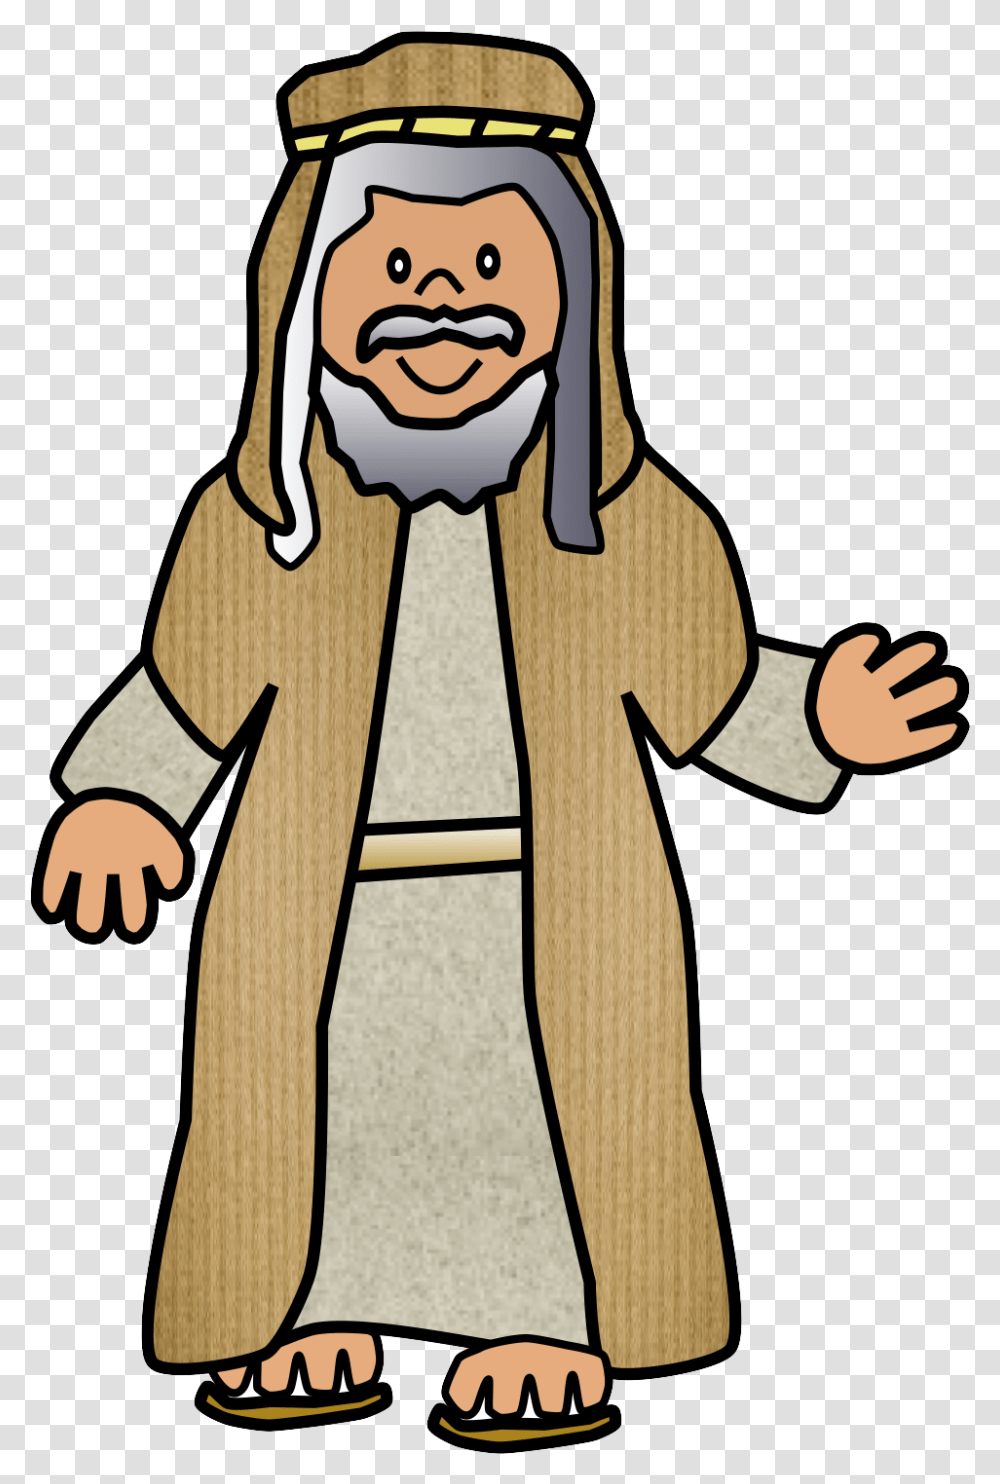 Clip Art Of Characters Cartoon Isaac From The Bible, Costume, Apparel, Face Transparent Png